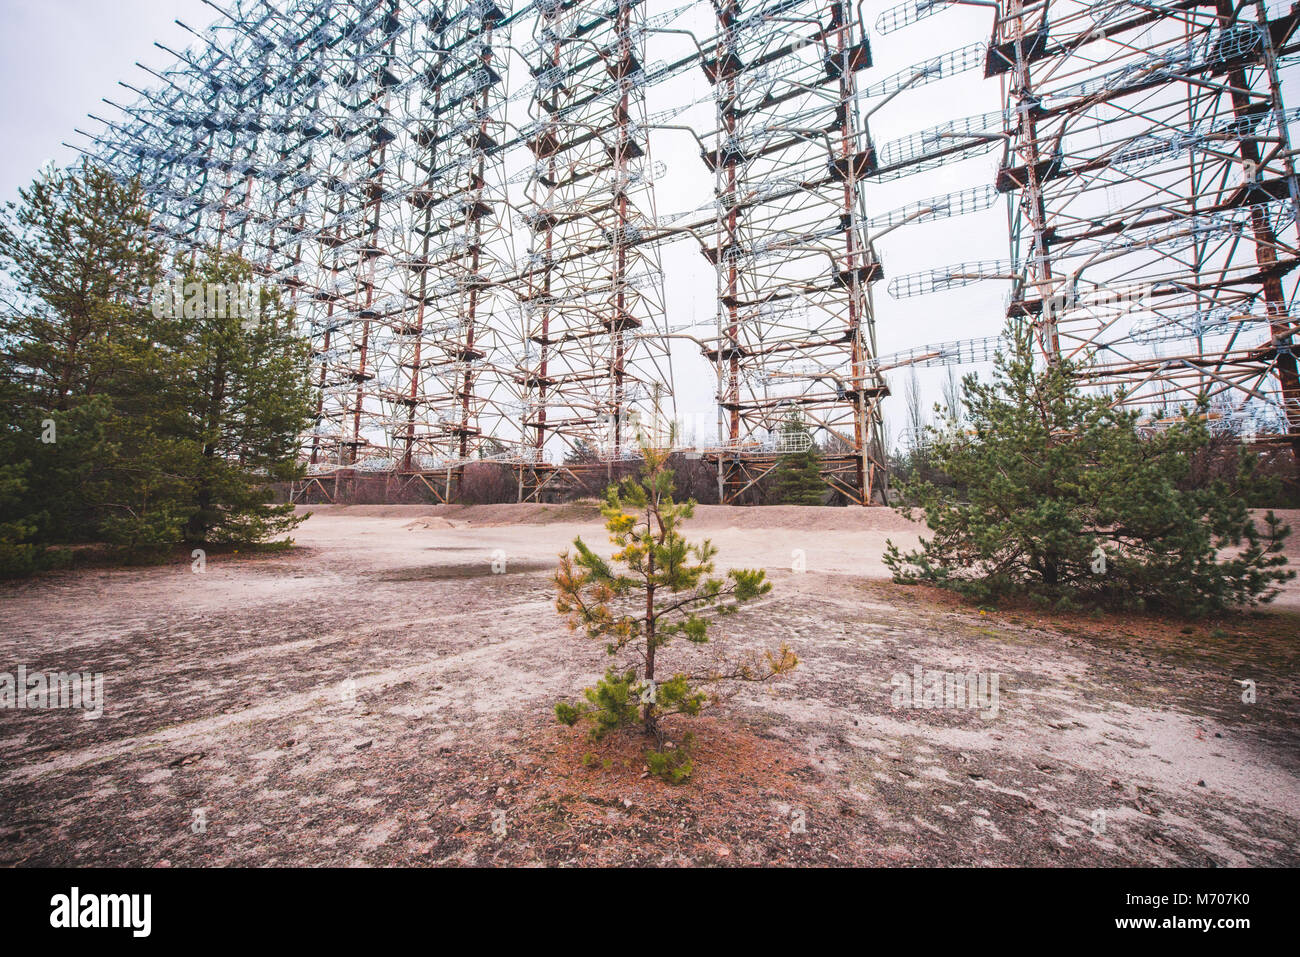 Ukraine, Chernobyl: Abandoned vehicles, houses and places from the evacuated Chernobyl exclusion zone. Photo: Alessandro Bosio Stock Photo